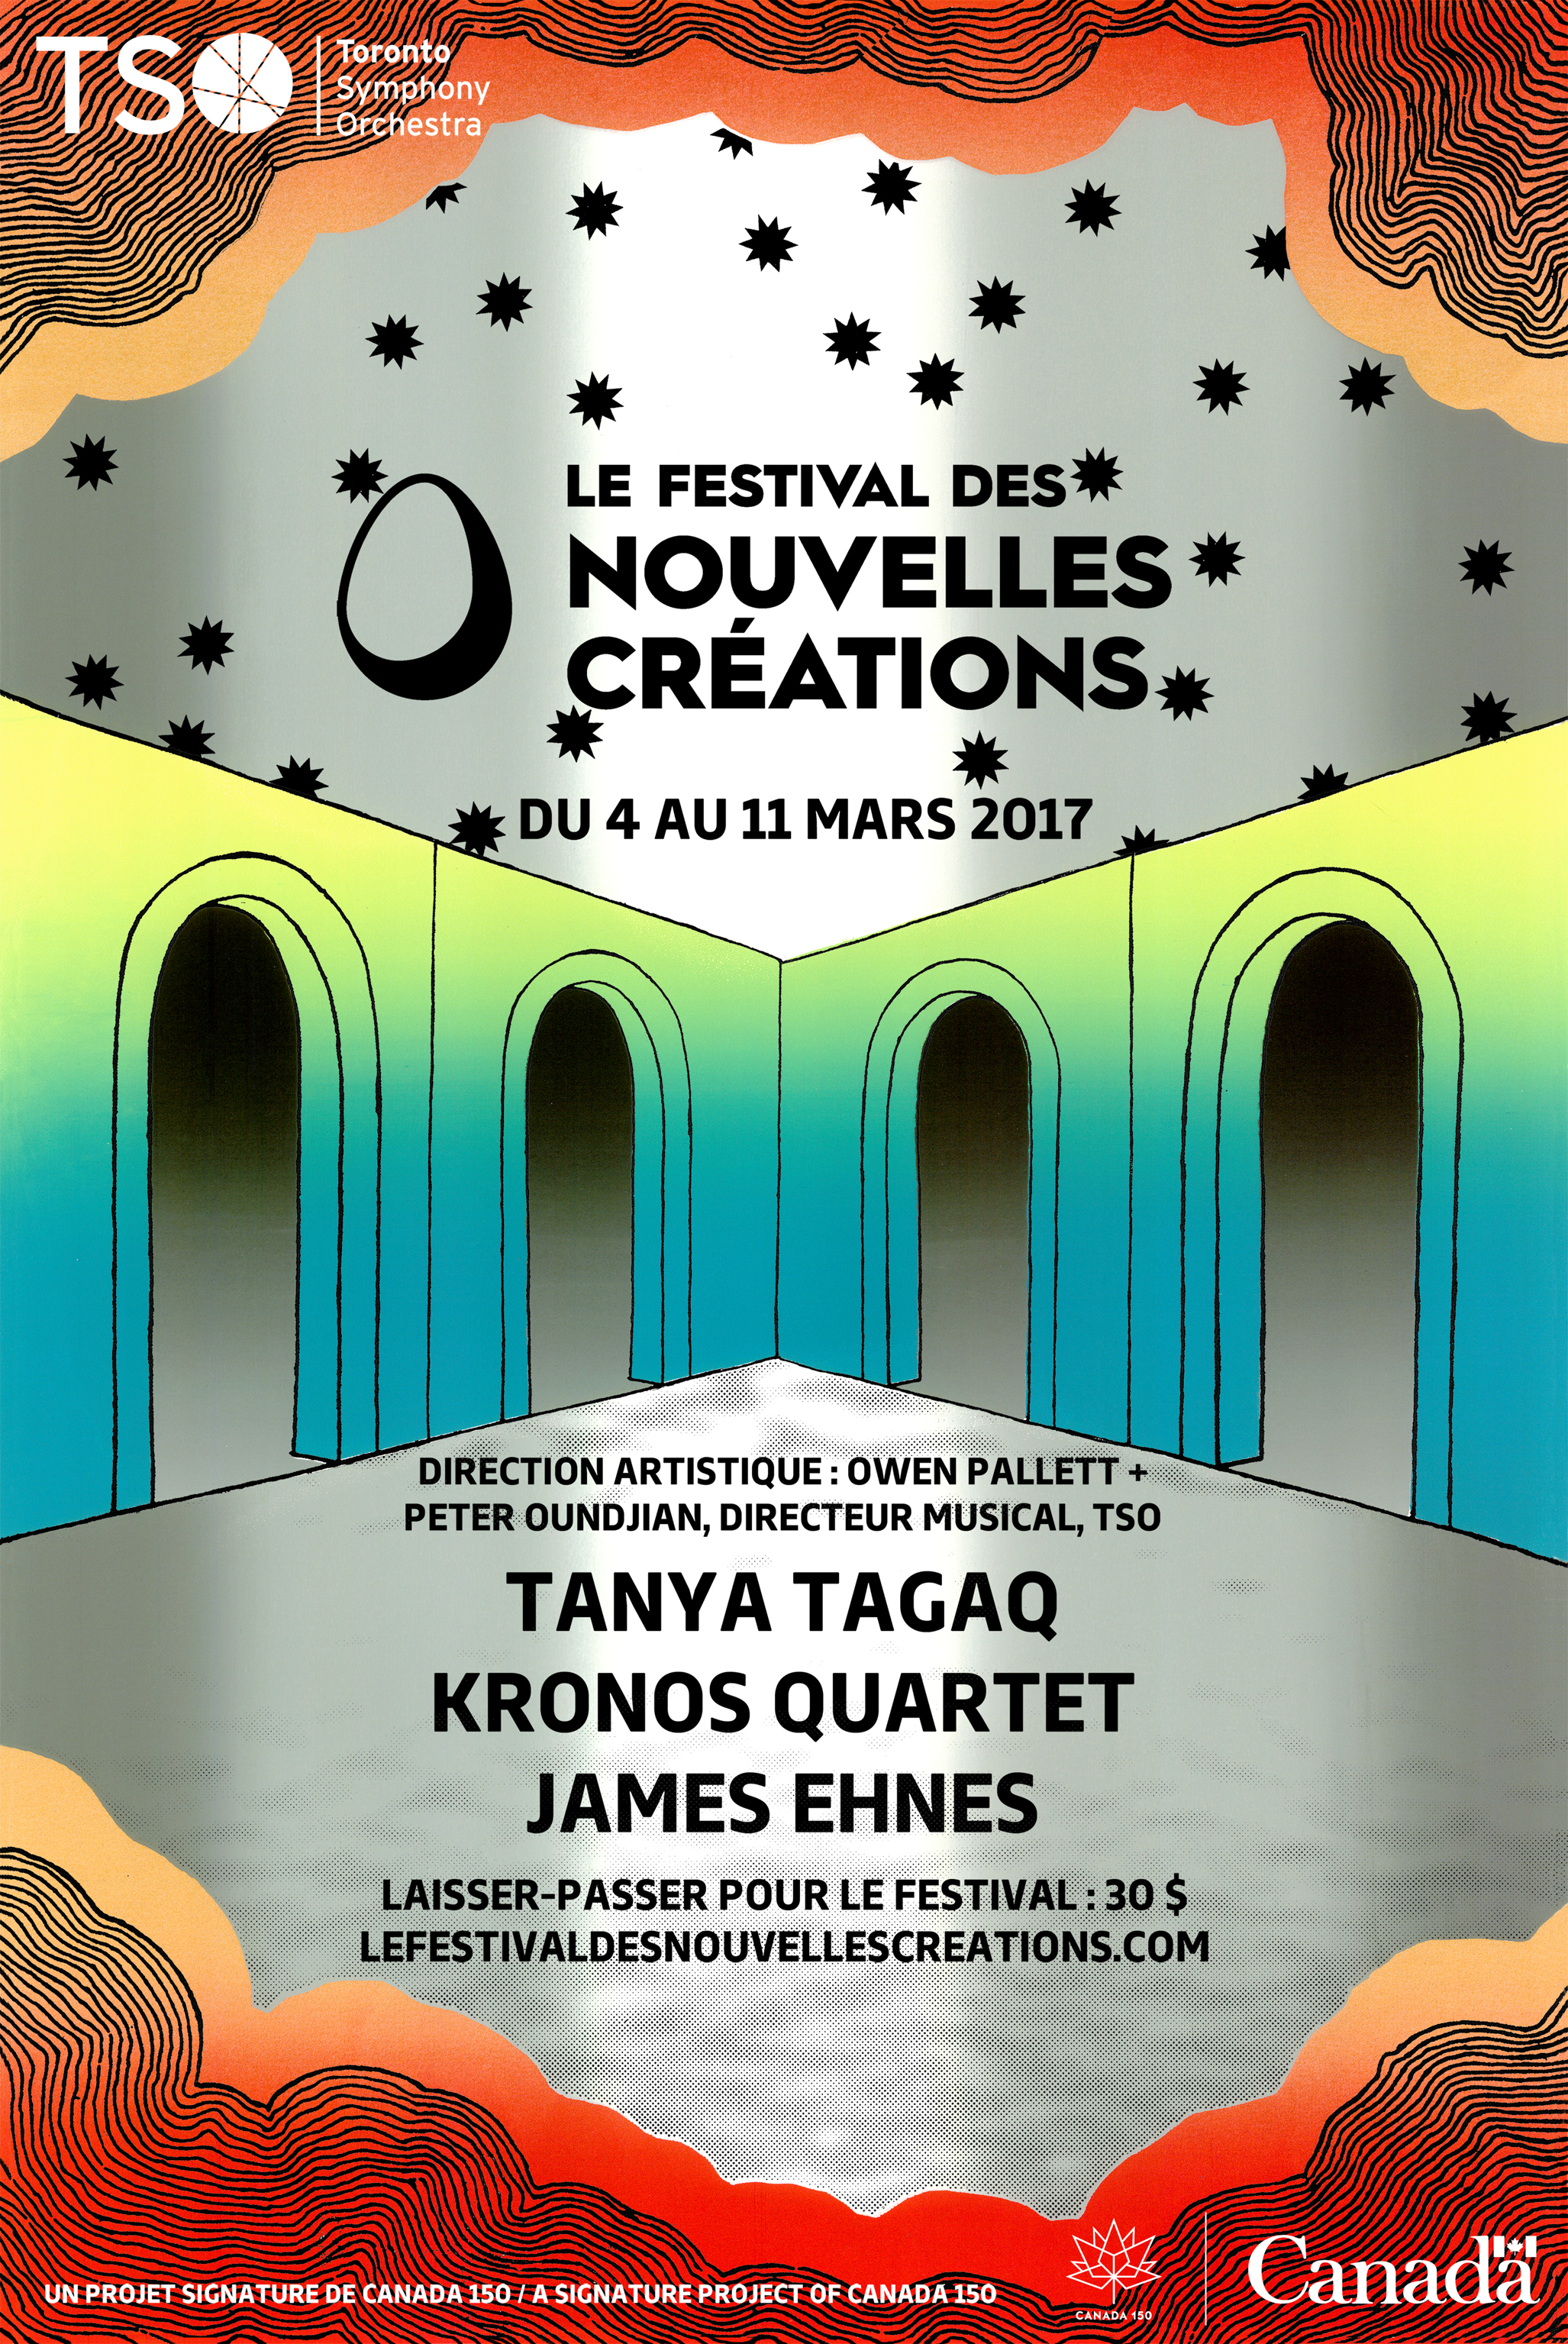  New Creations Festival 2017  (French version)  Screenprint  18" x 27"  2017 